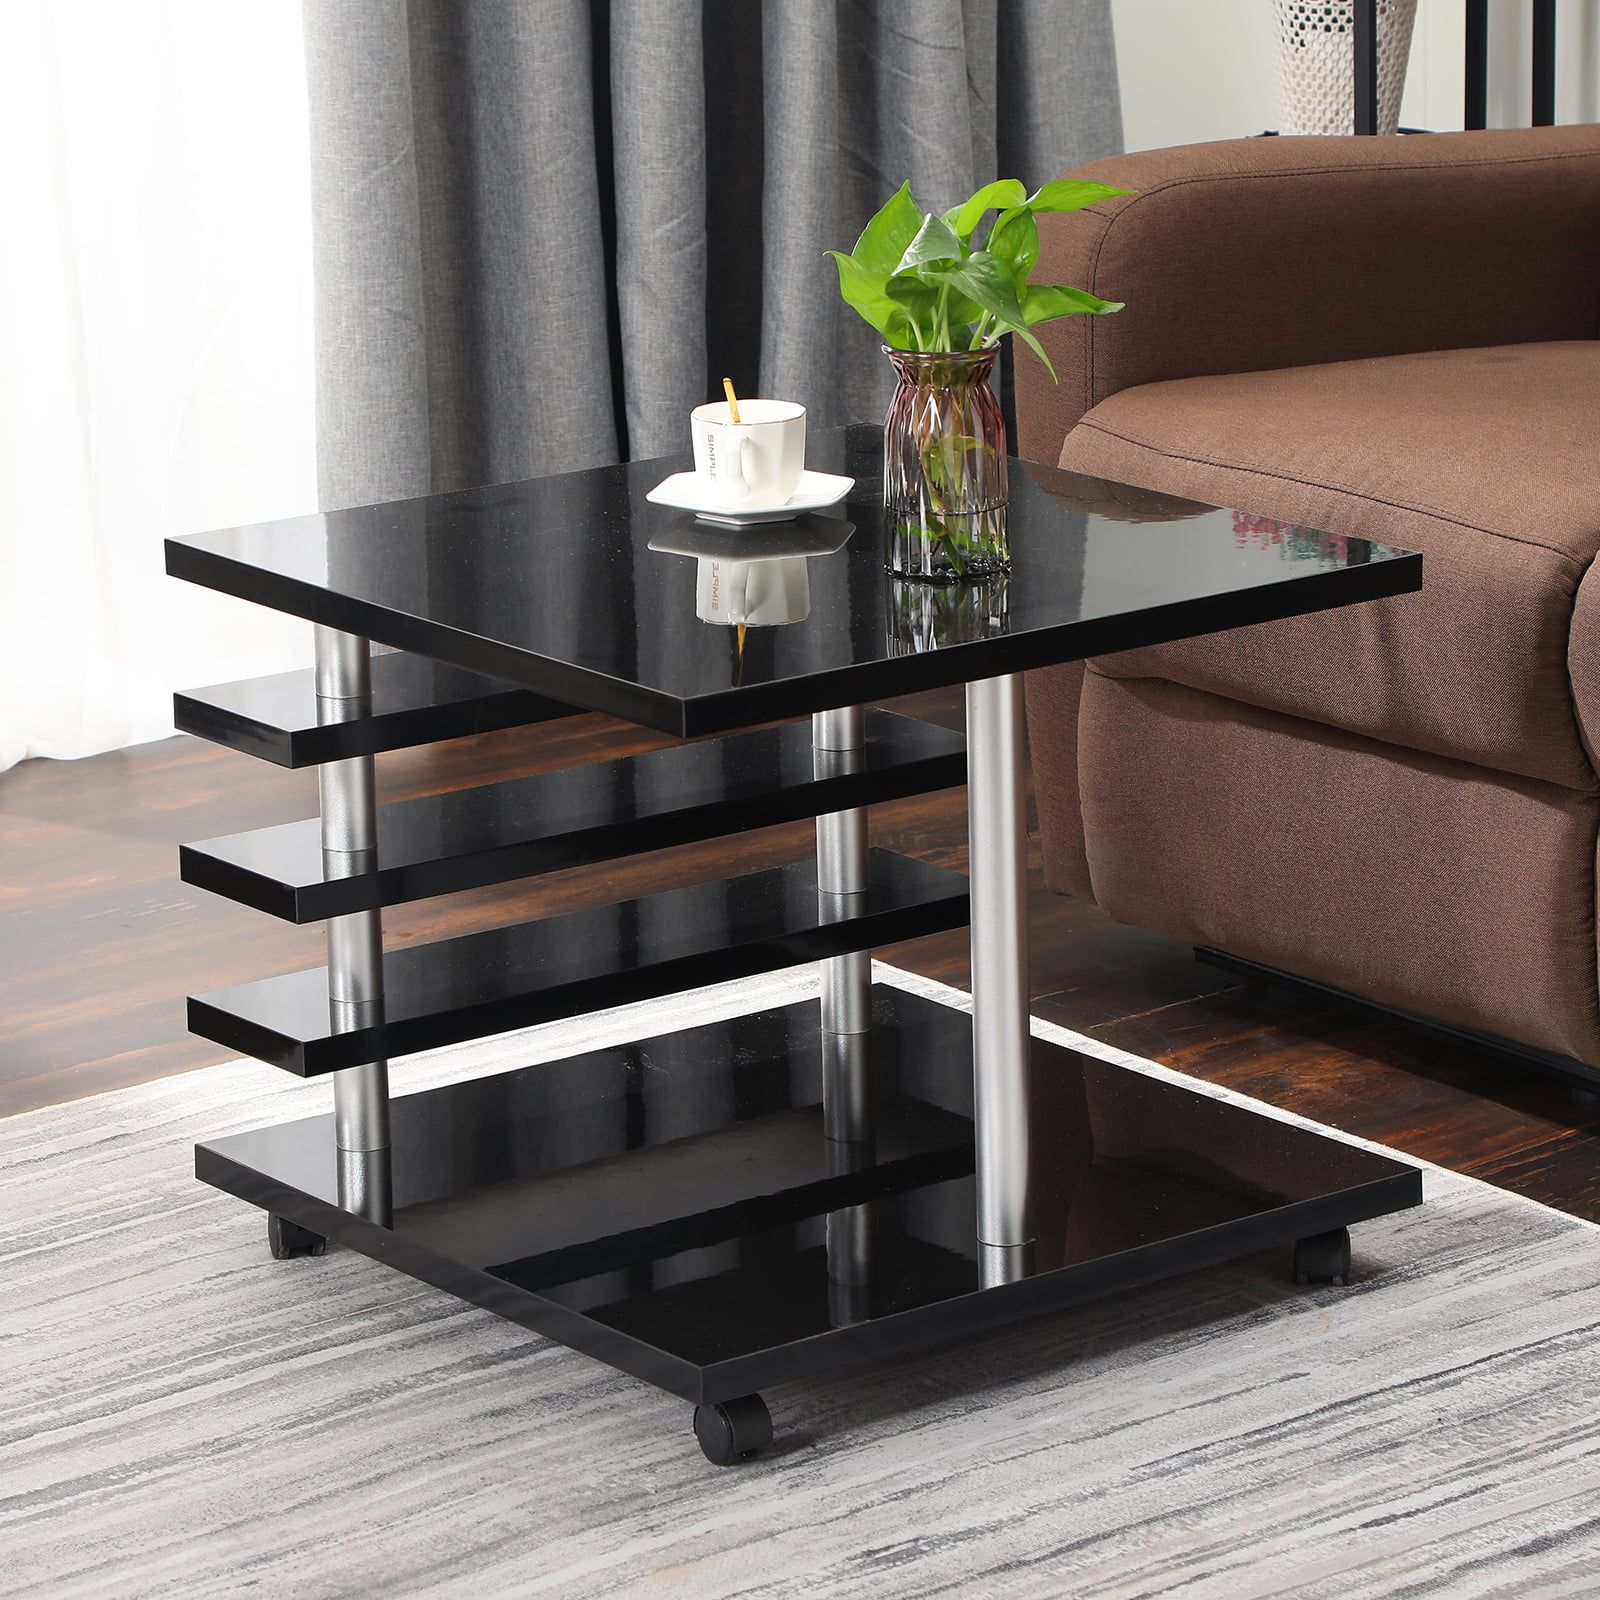 Hassch Modern Coffee Table With Led Lights Wood End Table With Wheels And  Storage Shelf For Home Bar Club, Black – Walmart Inside Hassch Modern Square Cocktail Tables (View 12 of 15)